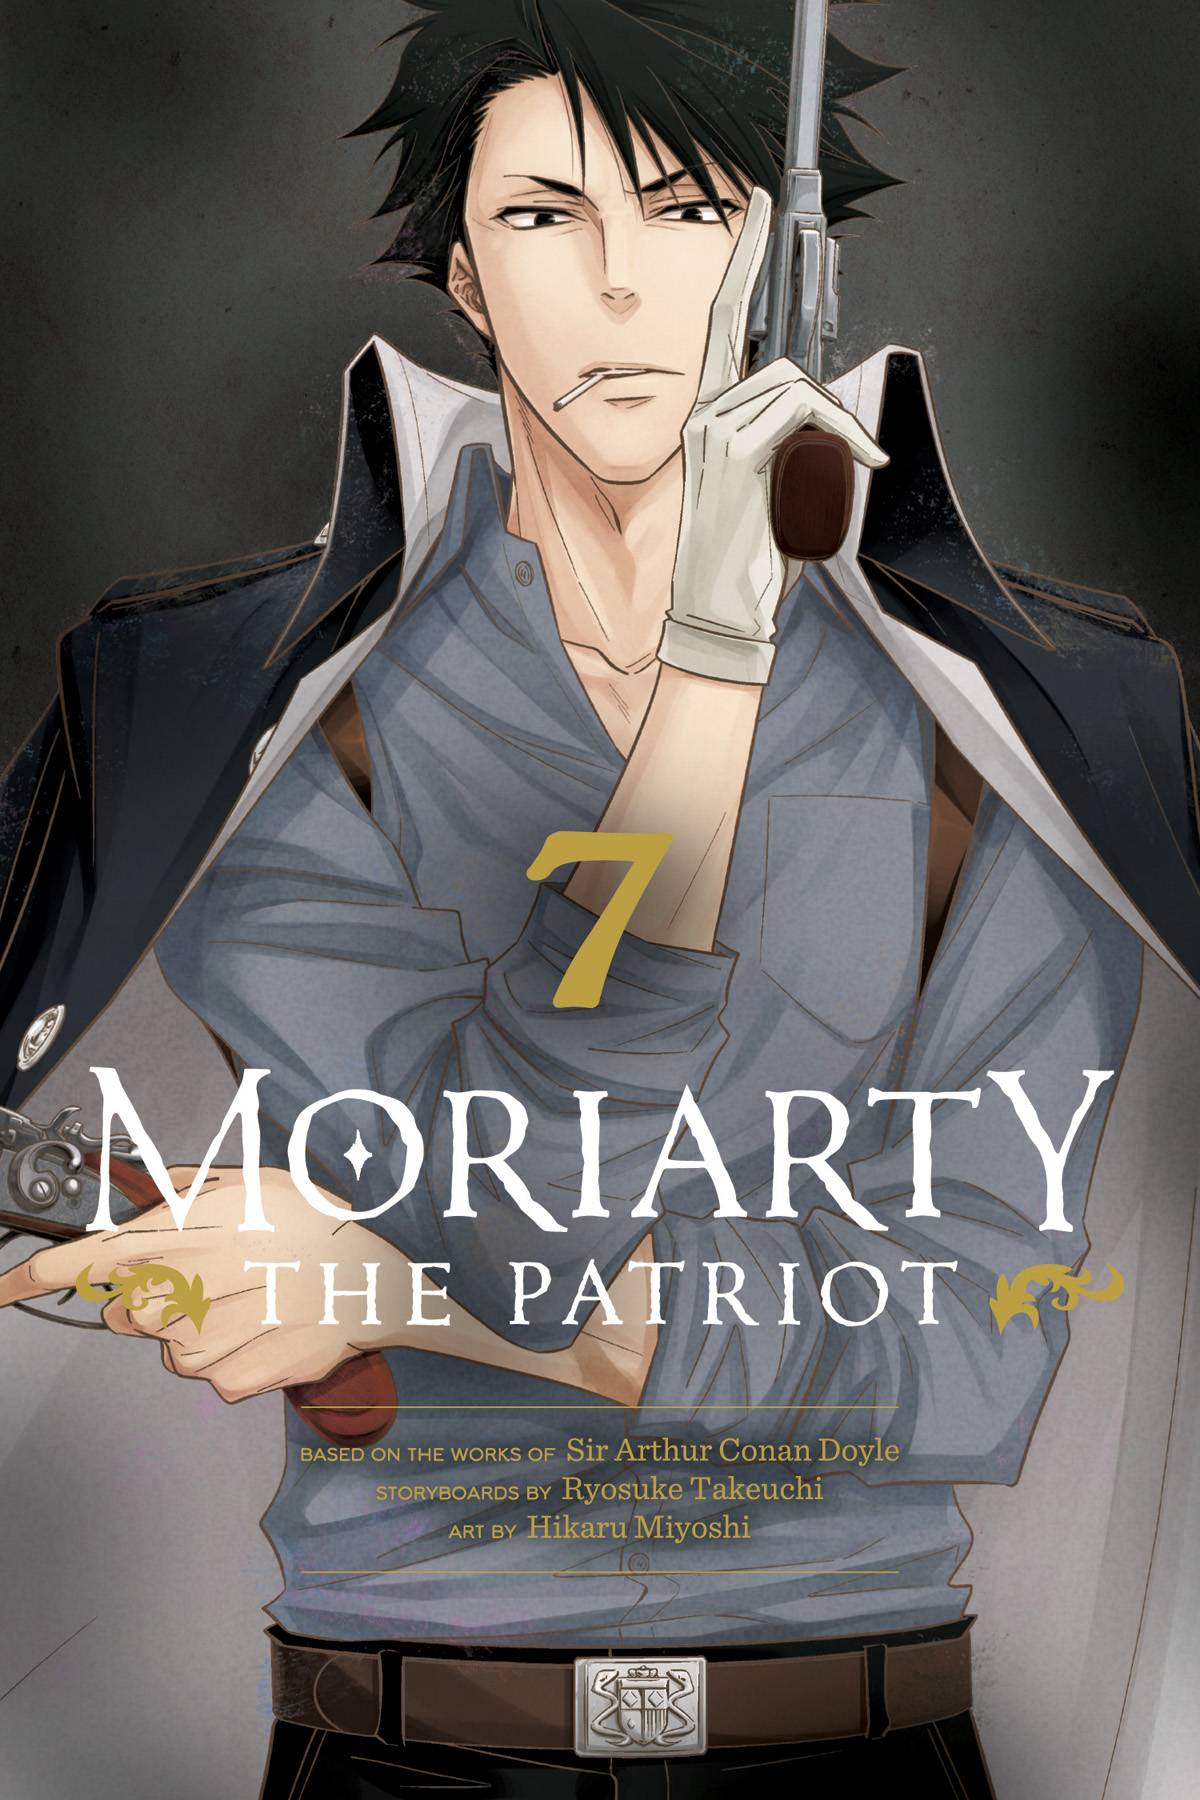 MORIARTY THE PATRIOT GN VOL 07